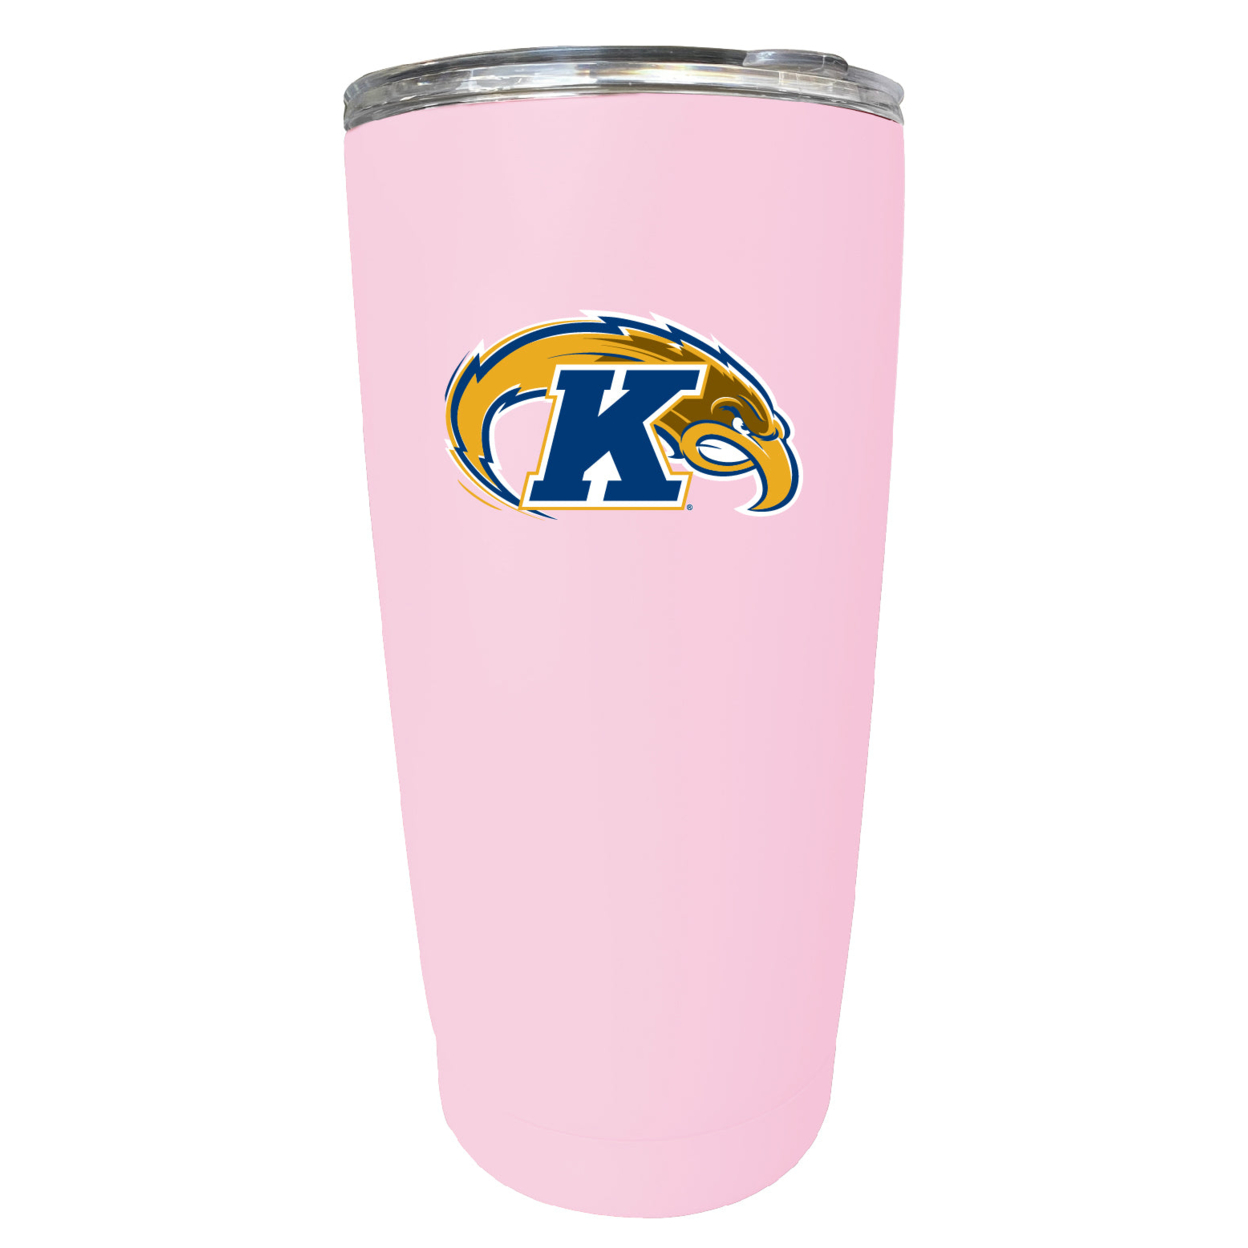 Kent State University 16 Oz Stainless Steel Insulated Tumbler - Yellow